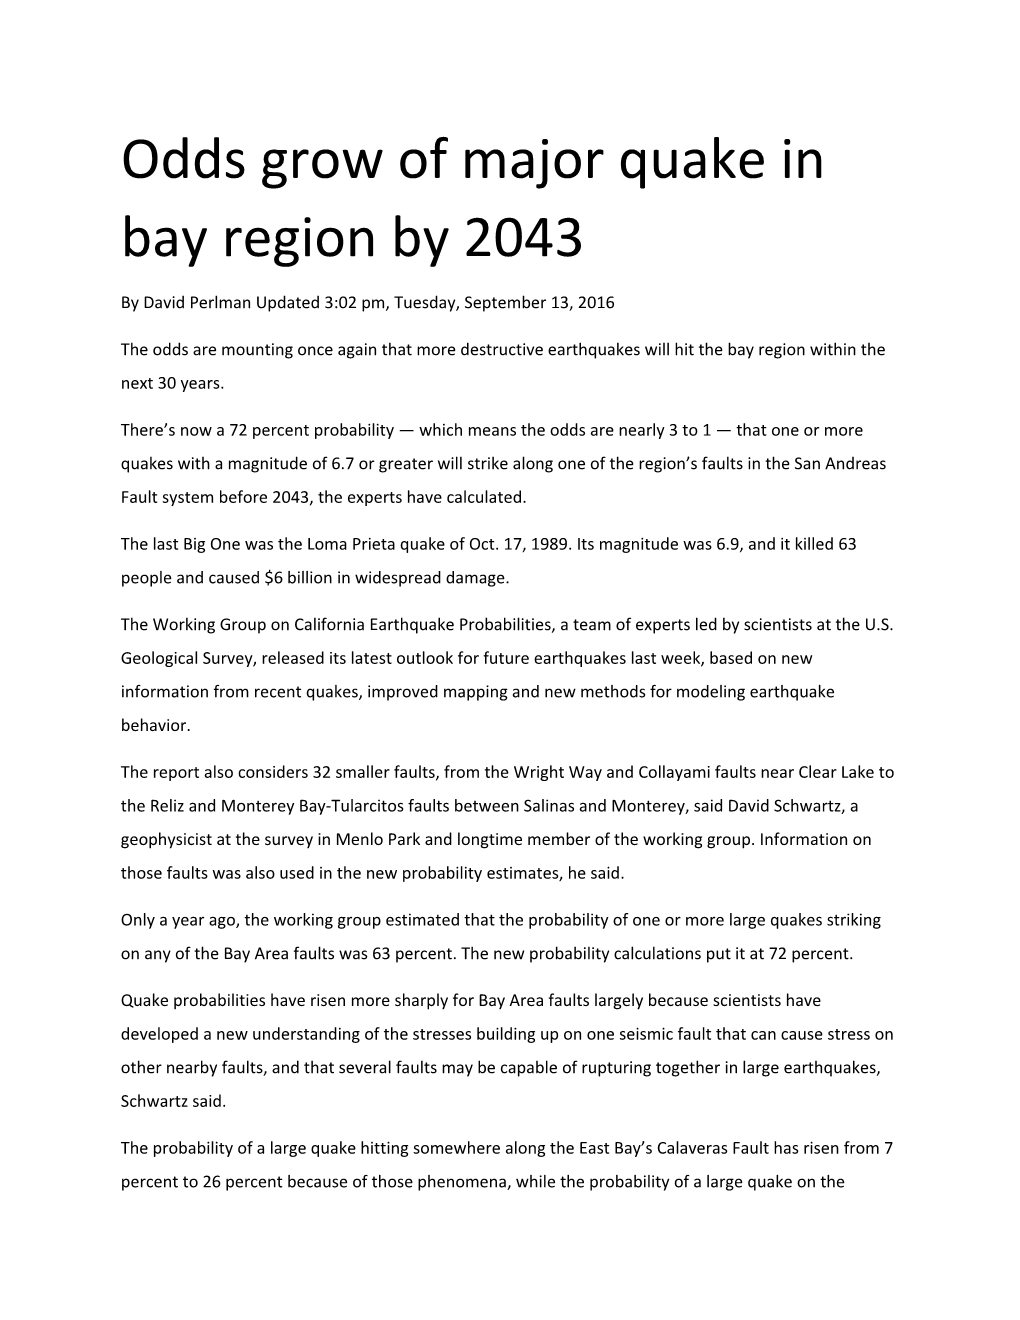 Odds Grow of Major Quake in Bay Region by 2043